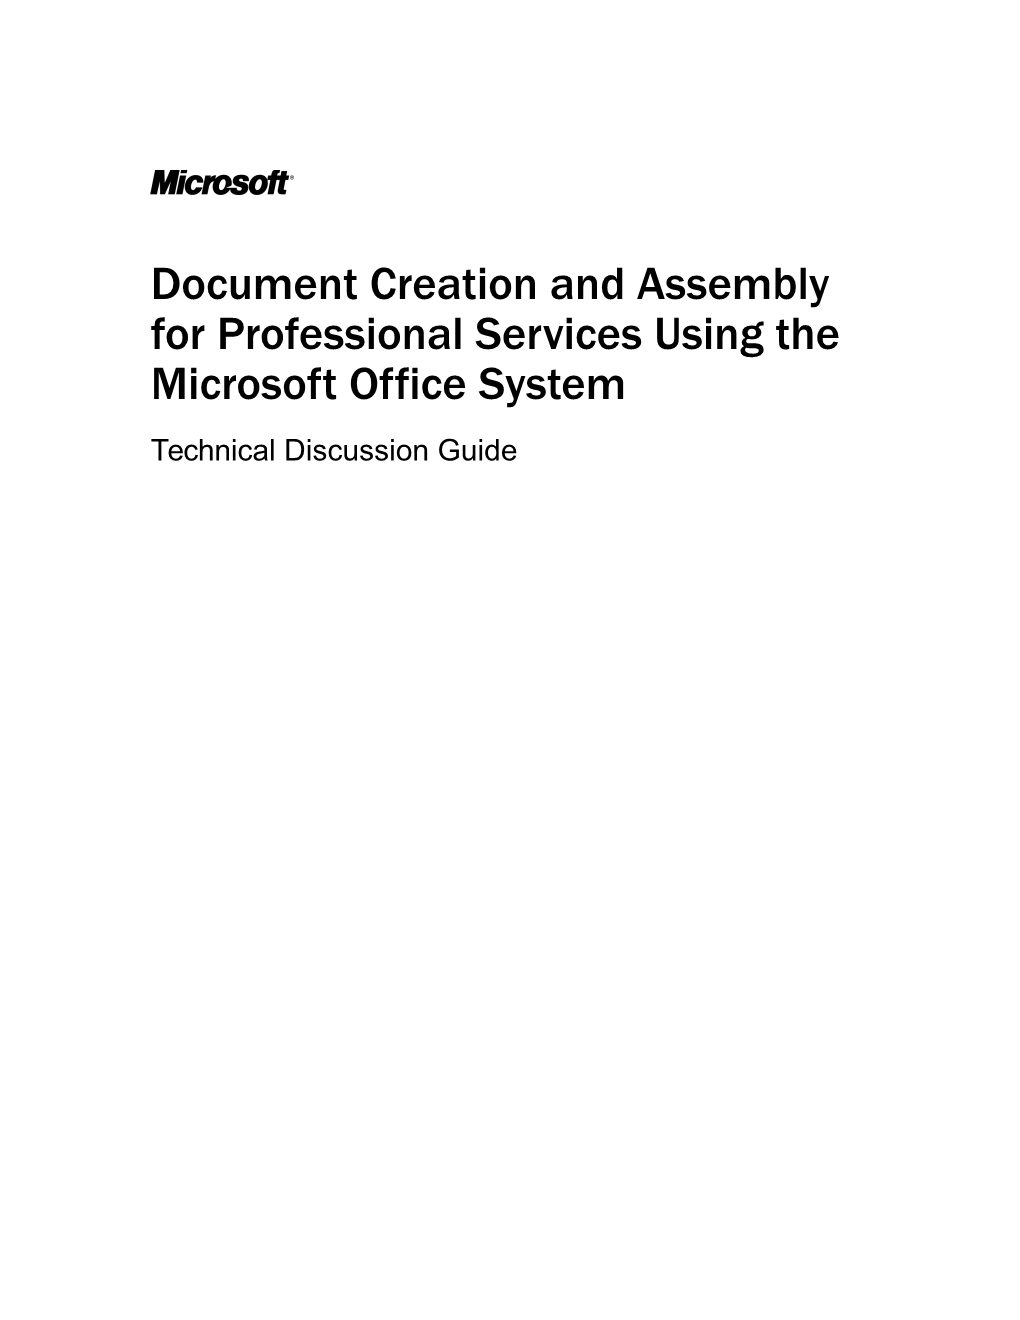 Streamlining Document Creation and Assembly for Professional Services- Technical Discussion